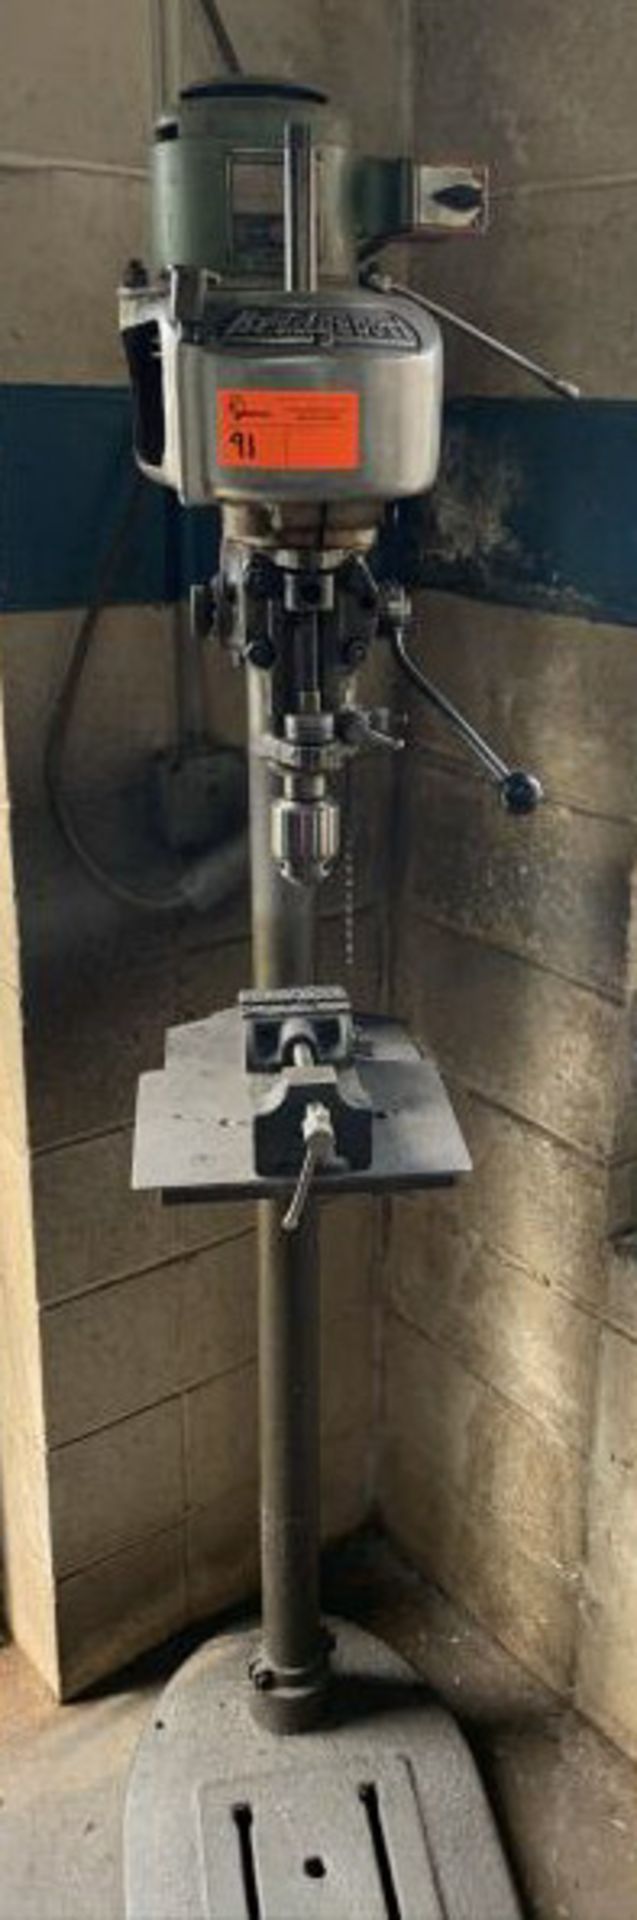 Bridgeport Drill Press, 1/2 Hp, with vise, 3 phase